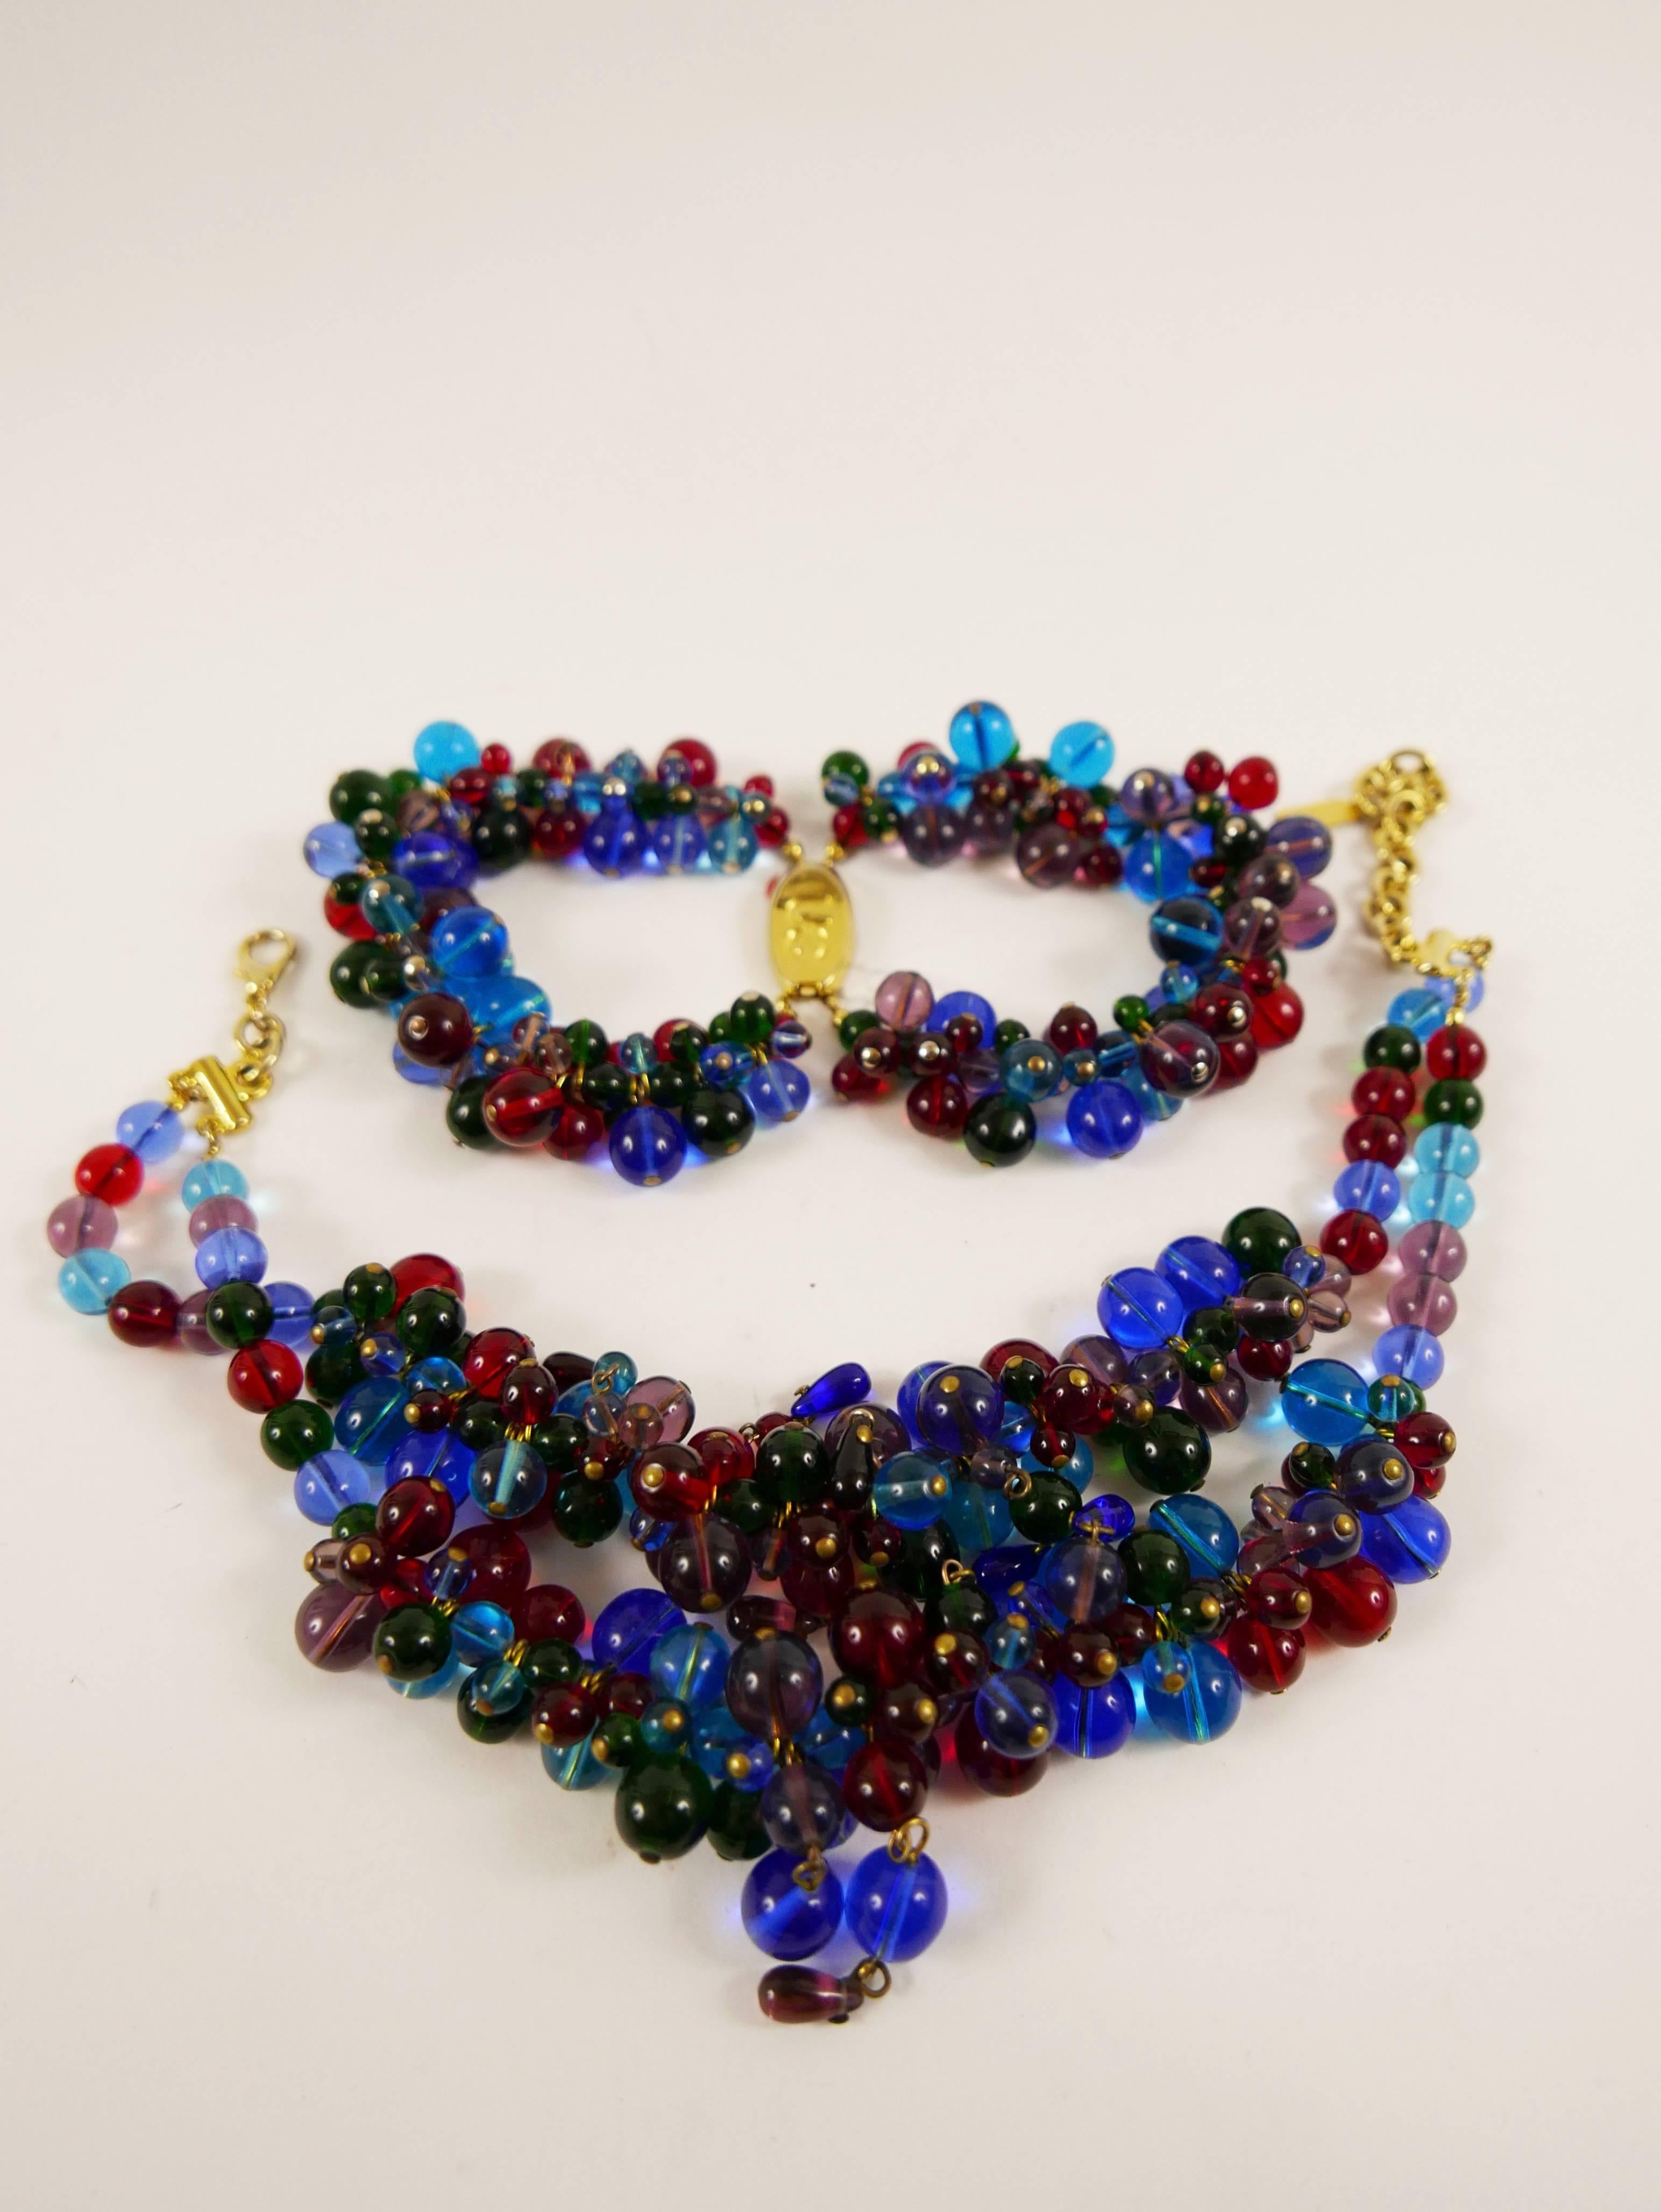 This amazing 1990 Ugo Correani set designed for Gianni Versace is in colourful glass beadeds. The set includes a necklace and a bracelet.
It's chunky and fun to wear this piece and great addition to a Fashion Jewelry collection!

Very good